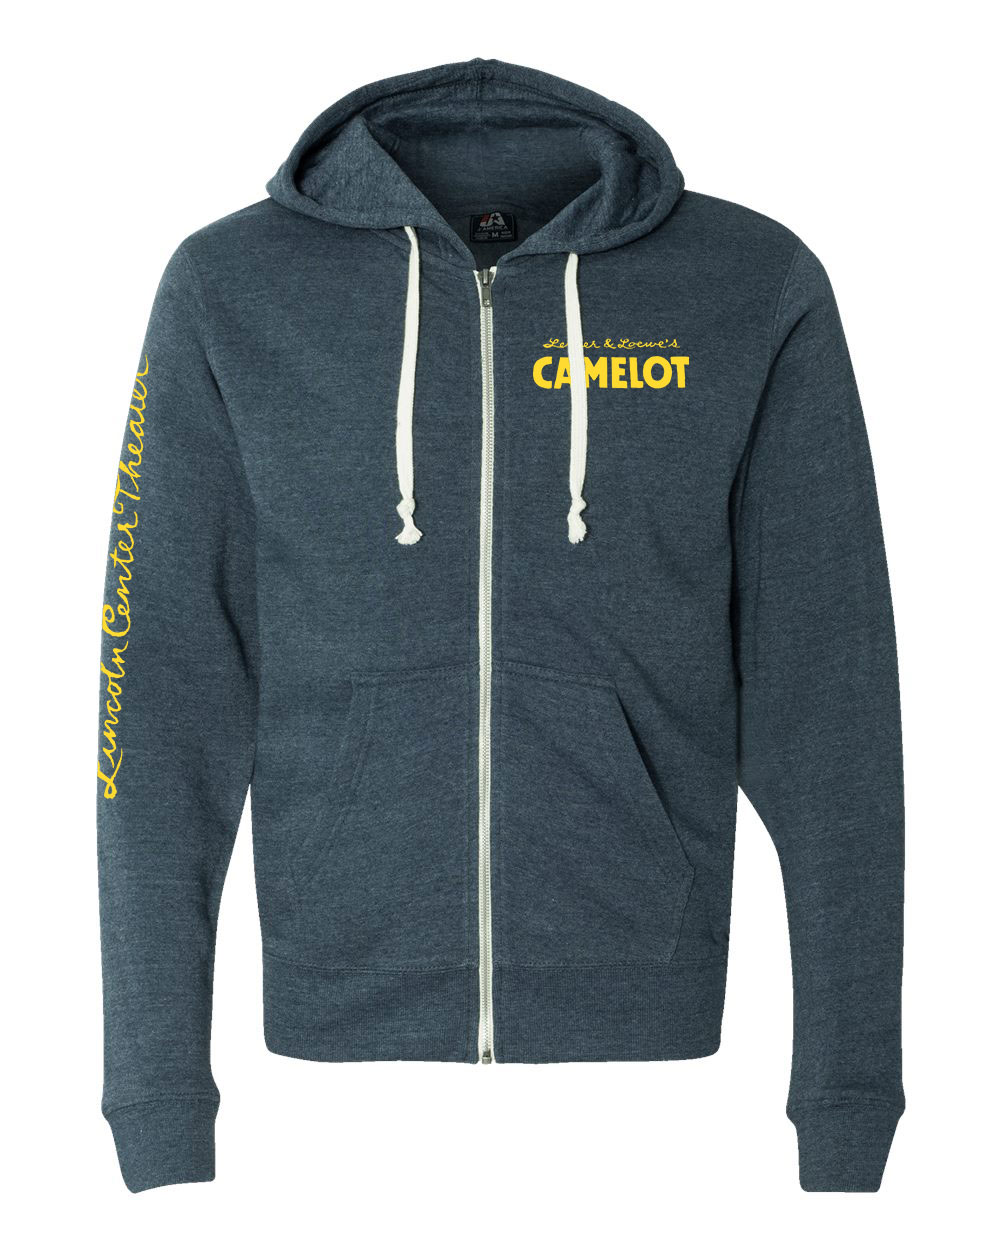 camelot hoody front